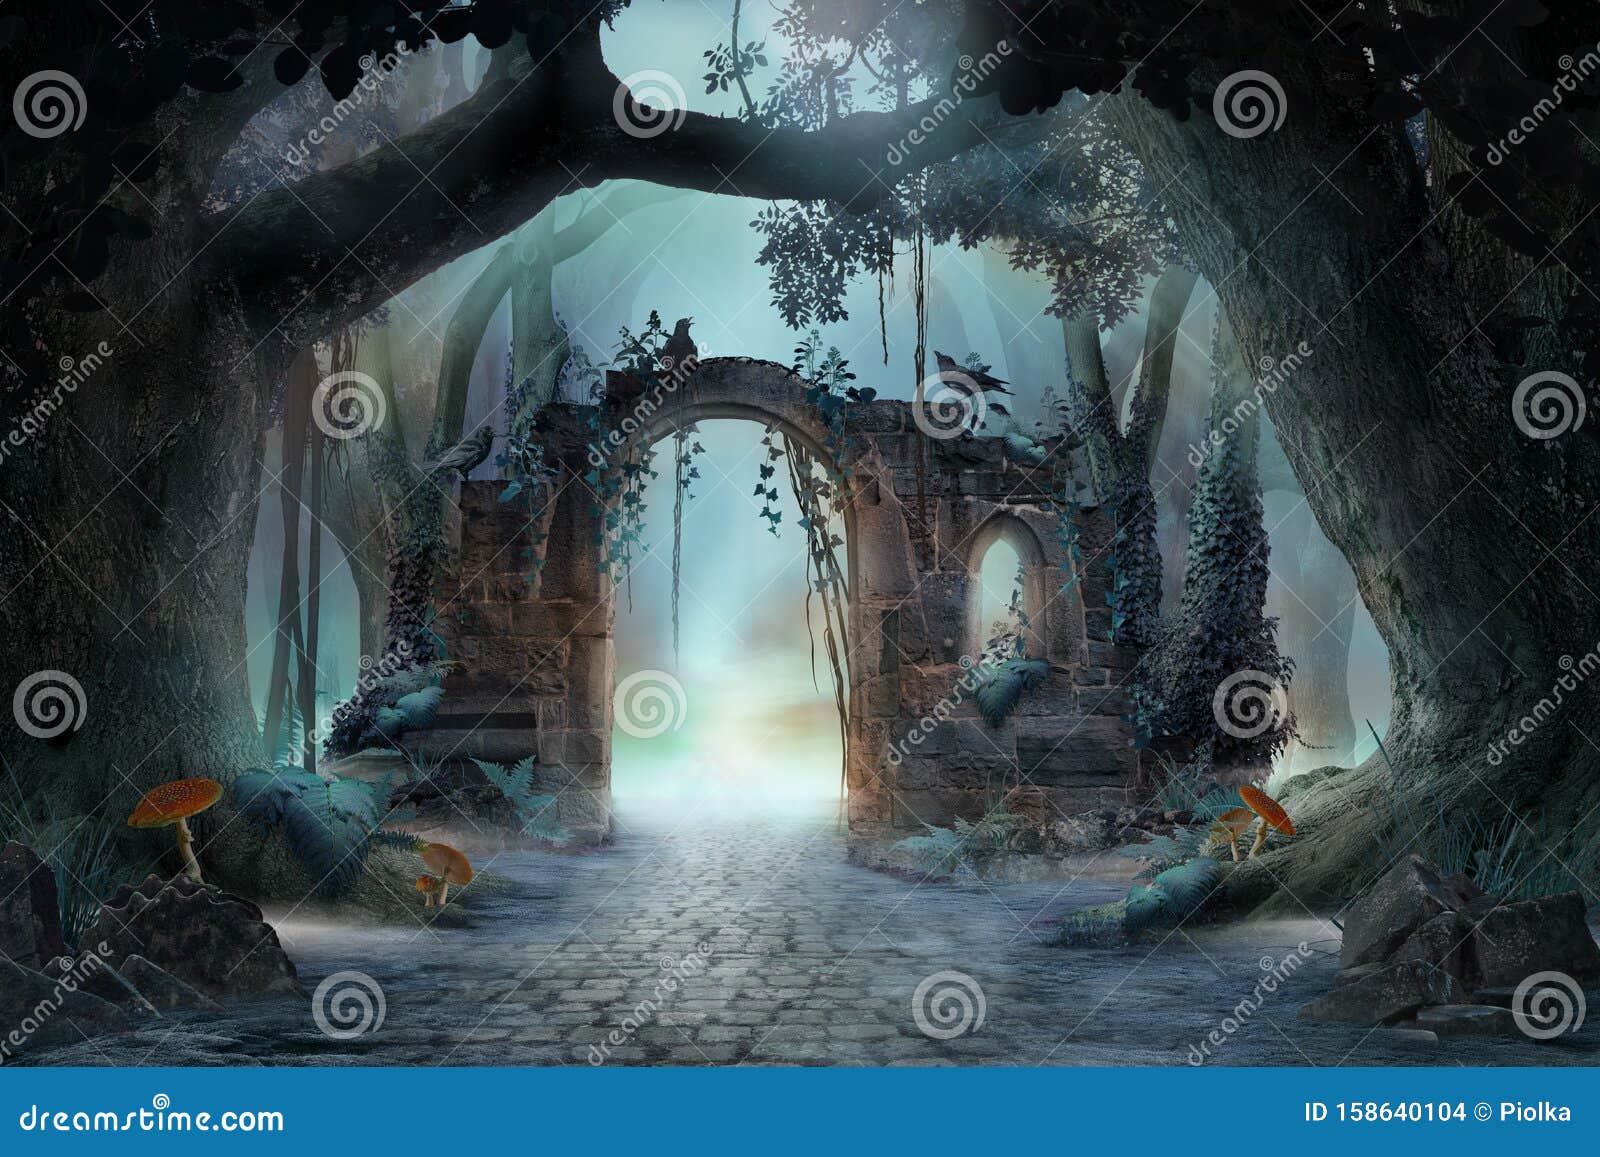 archway in an enchanted fairy forest landscape, misty dark mood,